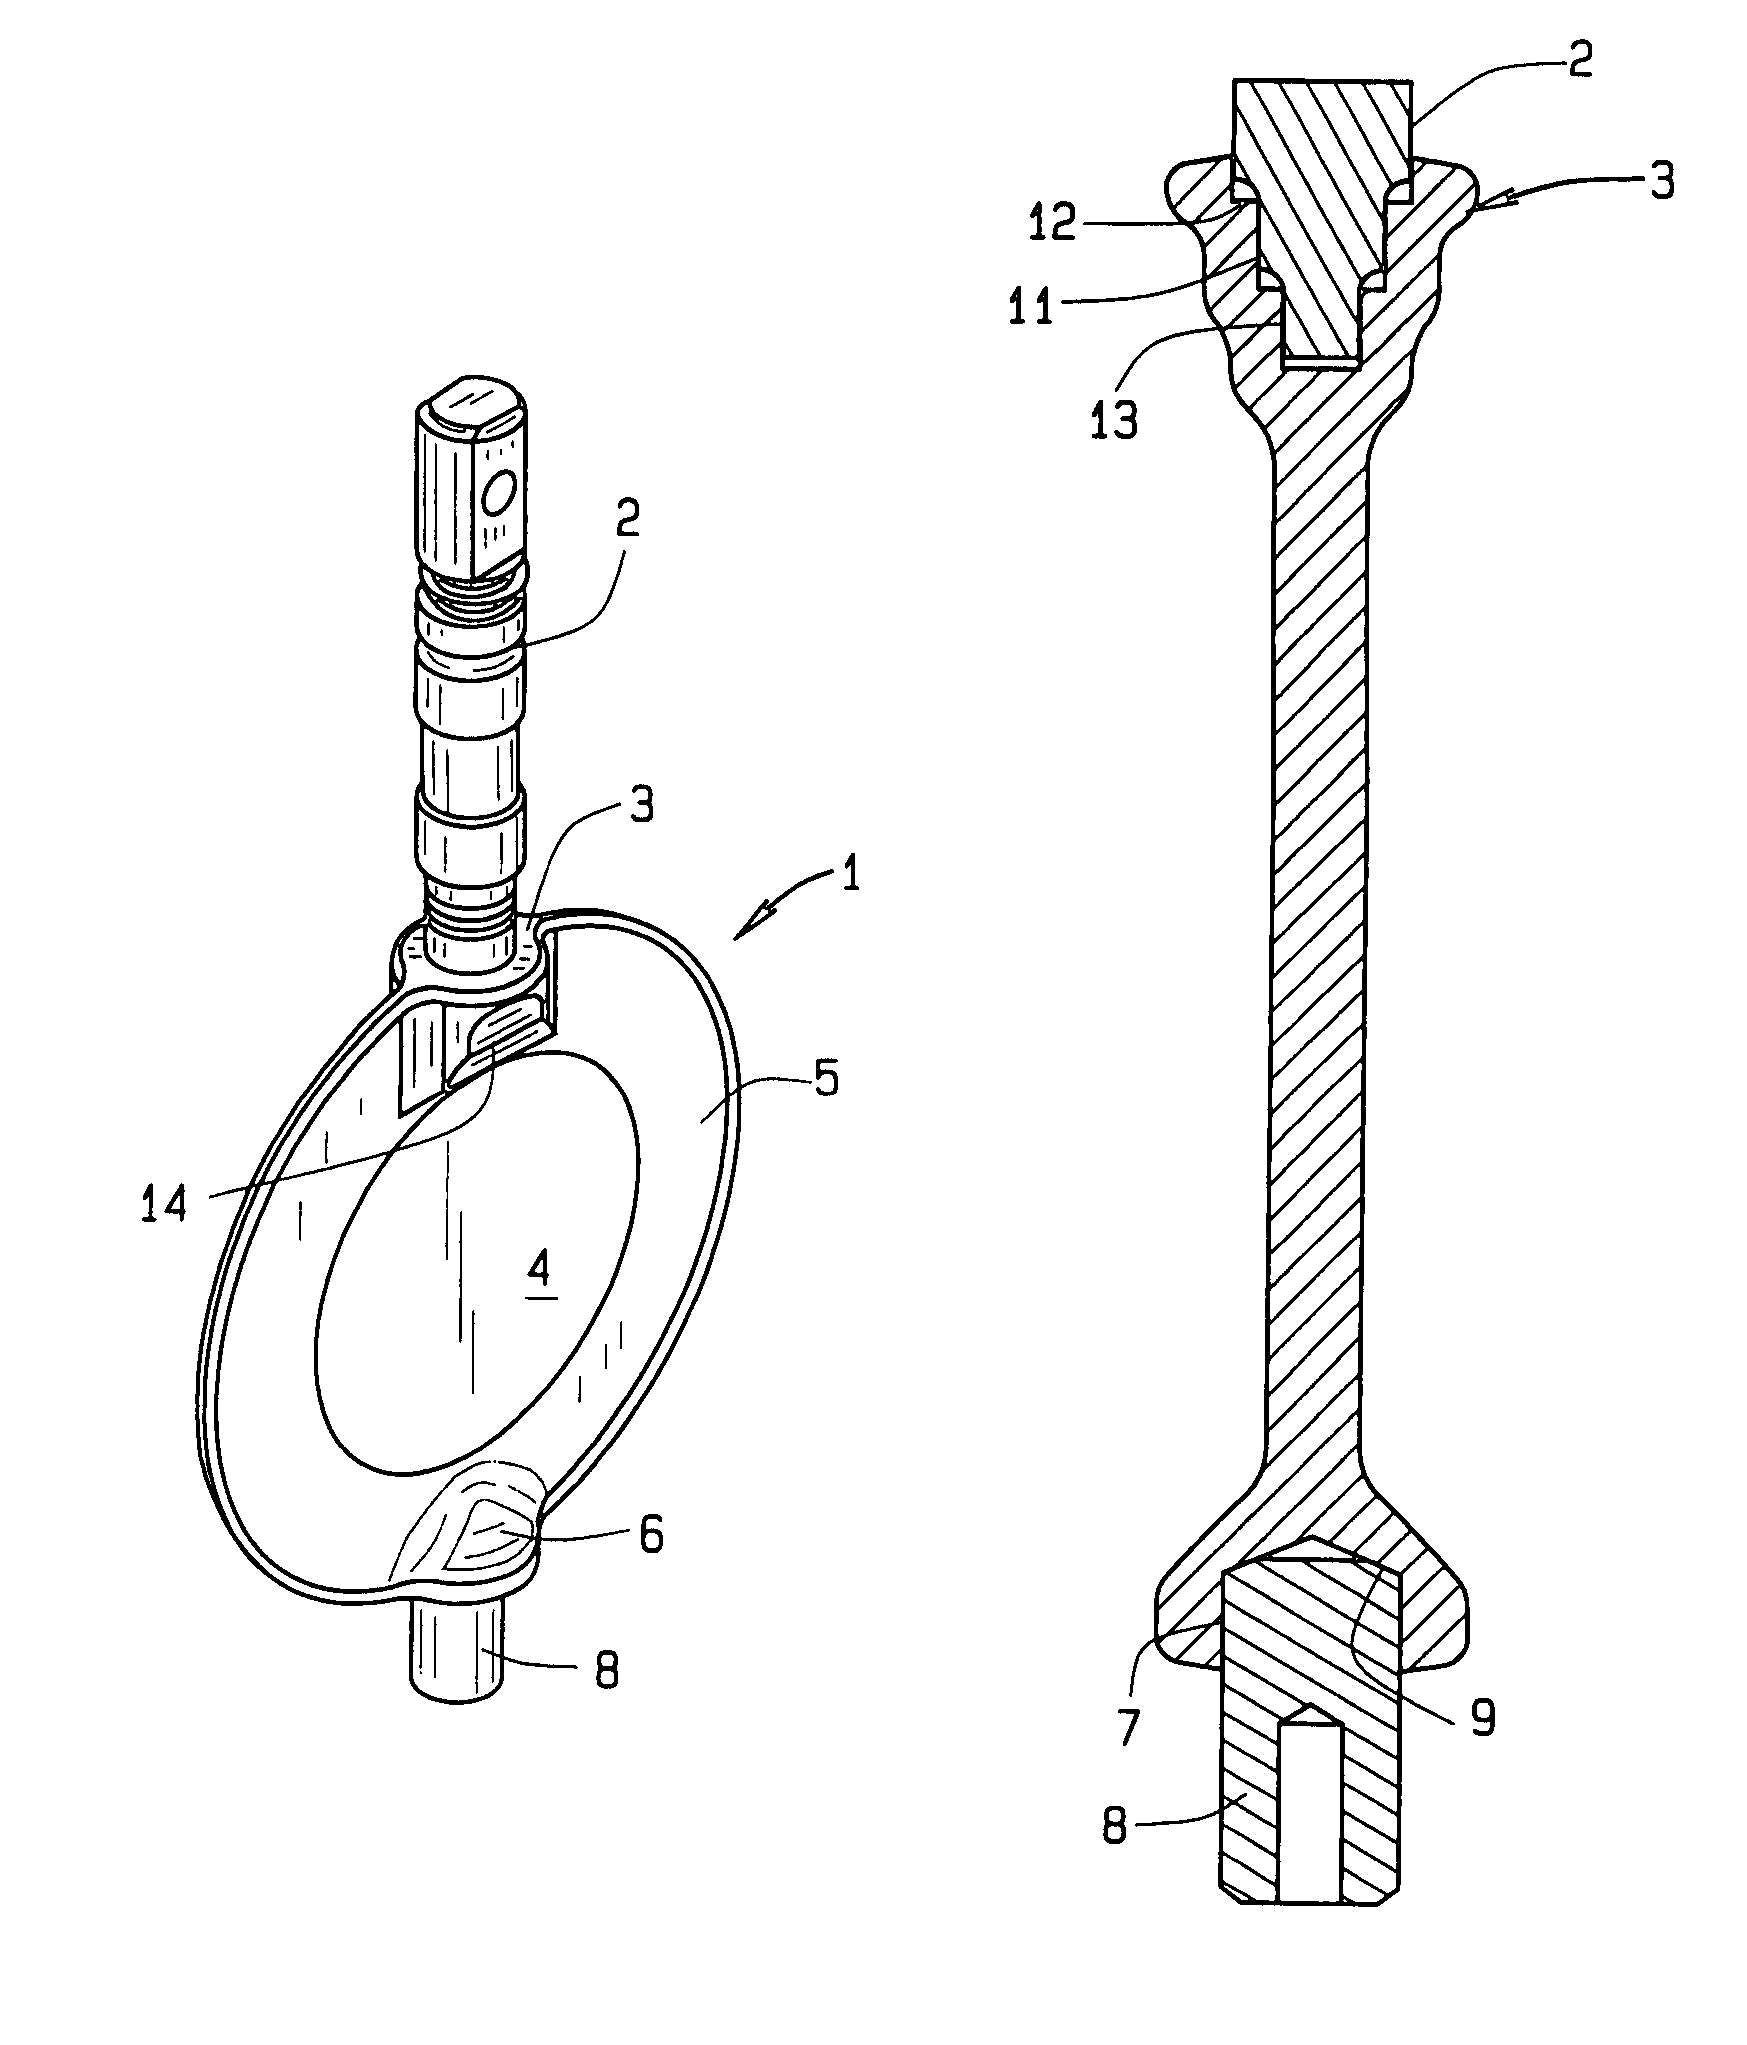 Butterfly valve disc to attain accelerated flow